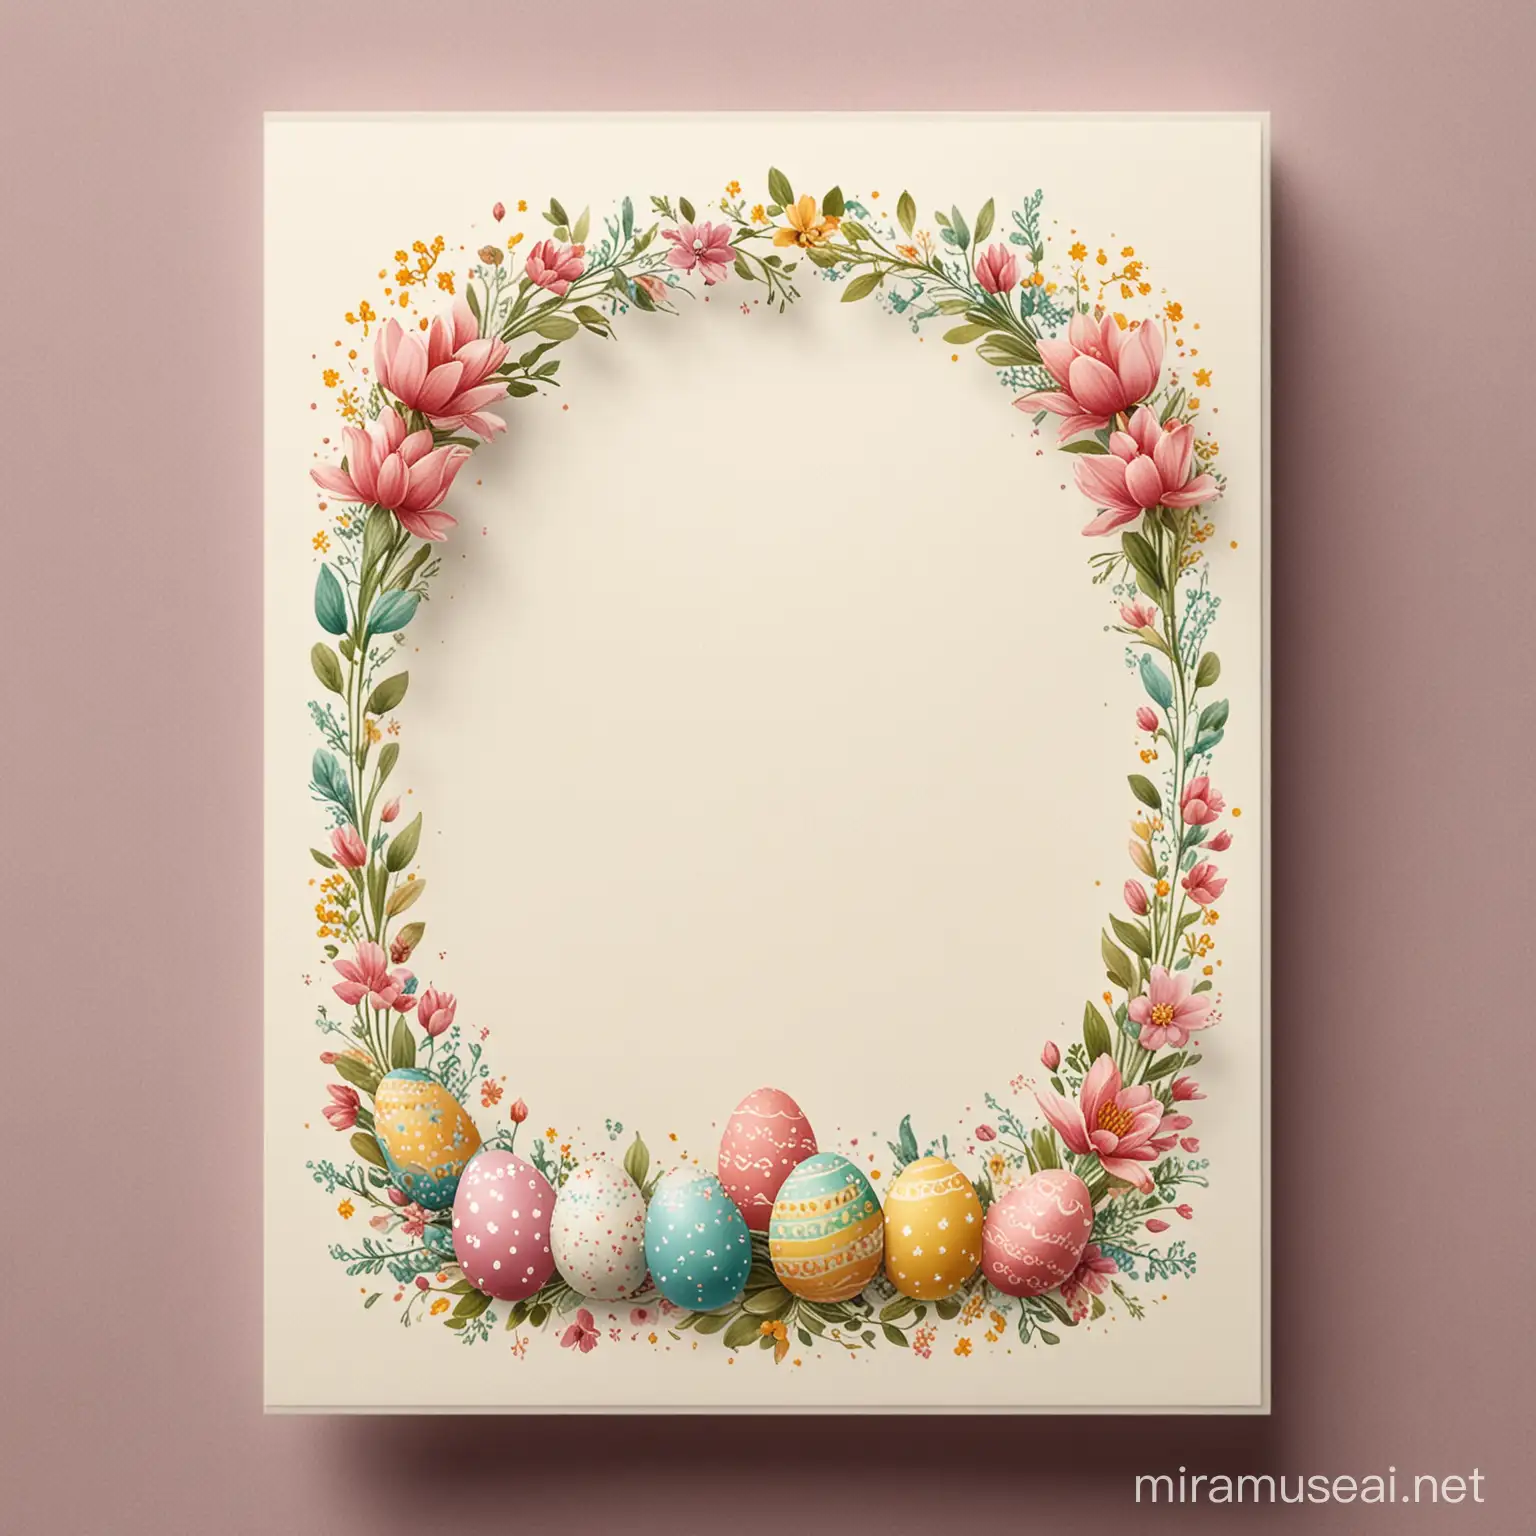 Generate an Easter card with clear space for my wishes. 